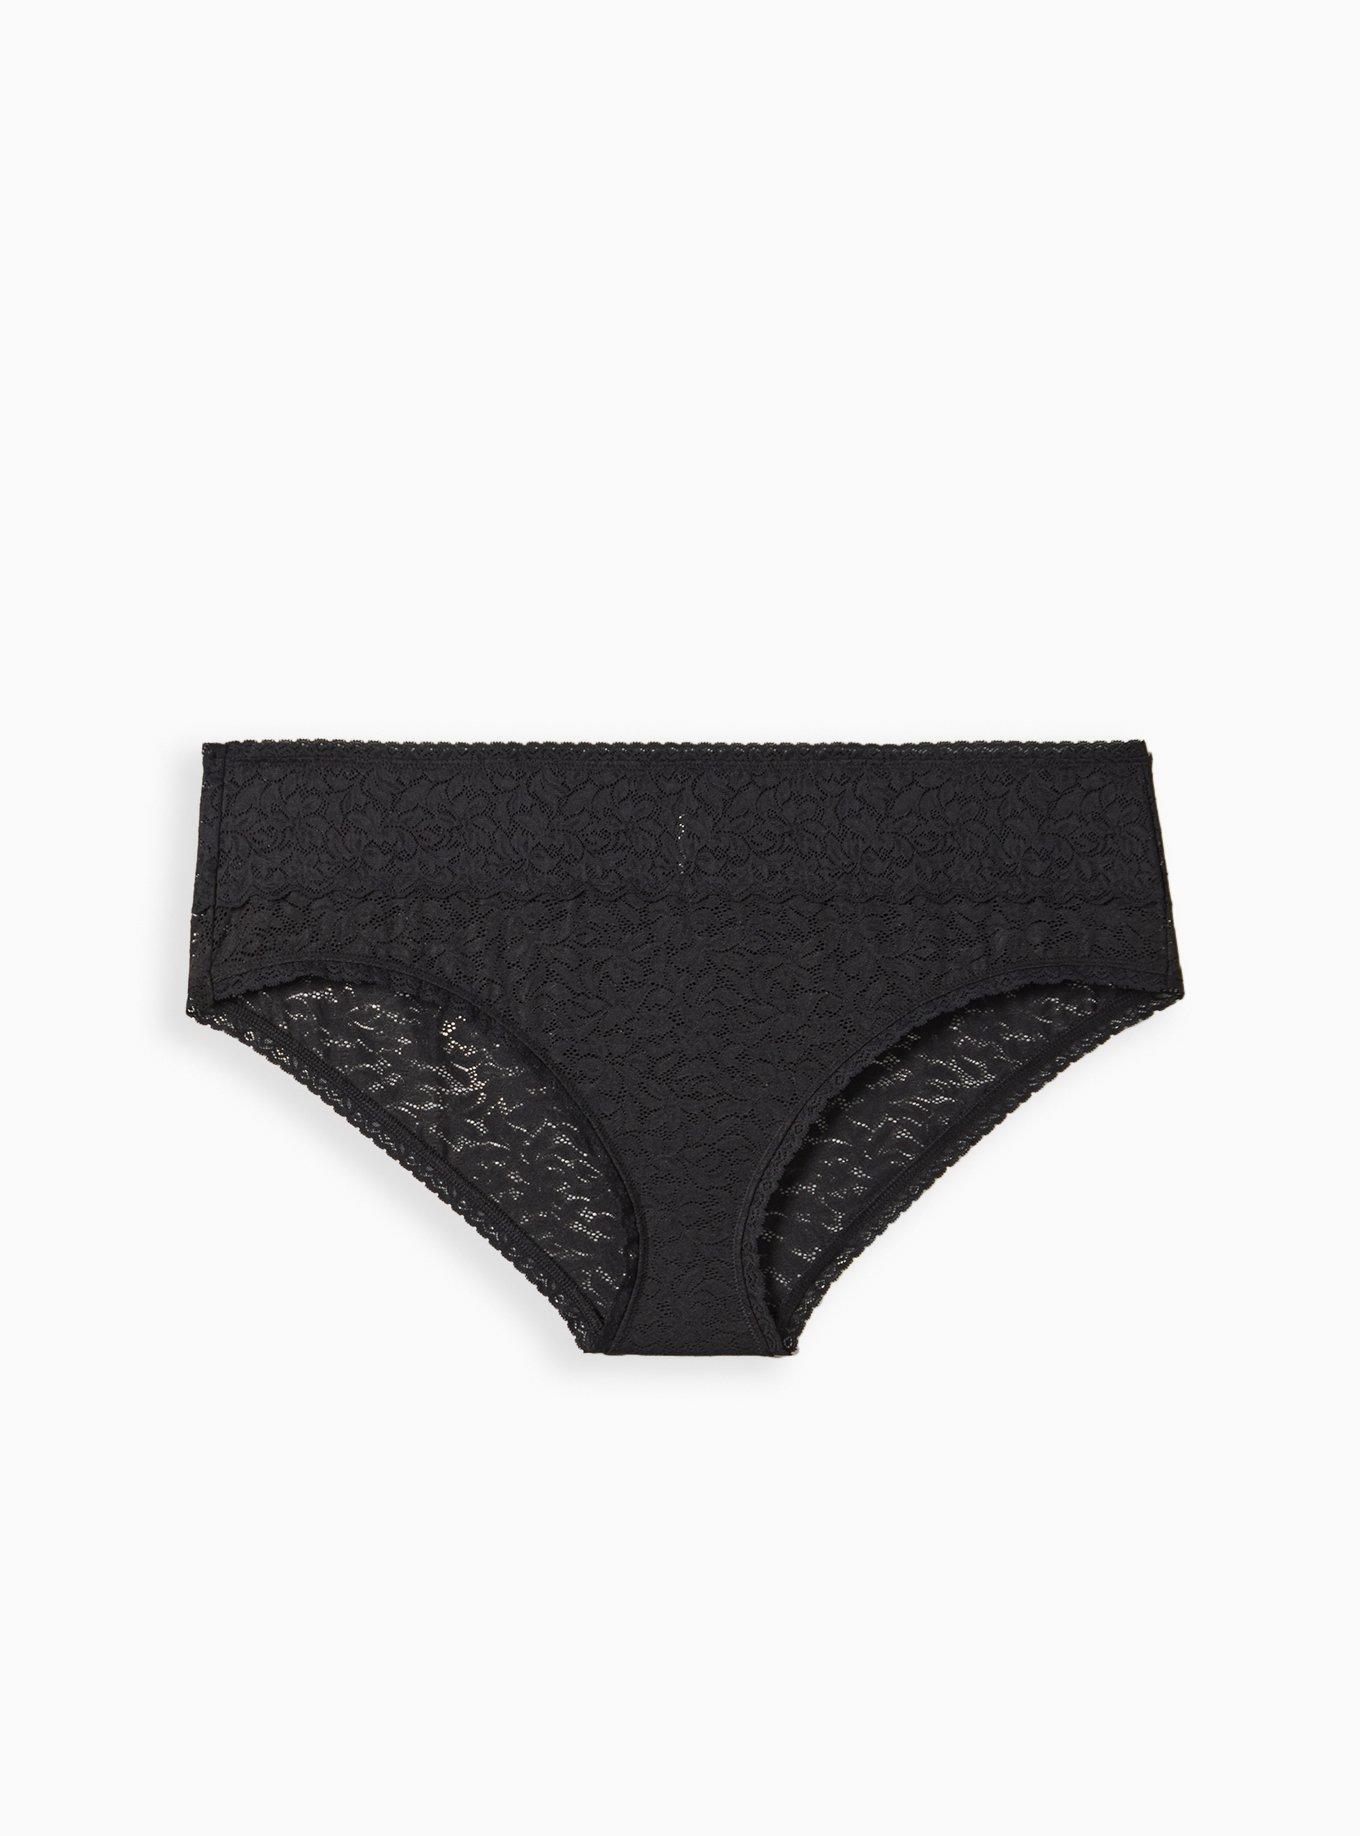 Torrid Curve Black High Waist Lace Thong Panty Stretch Size 2